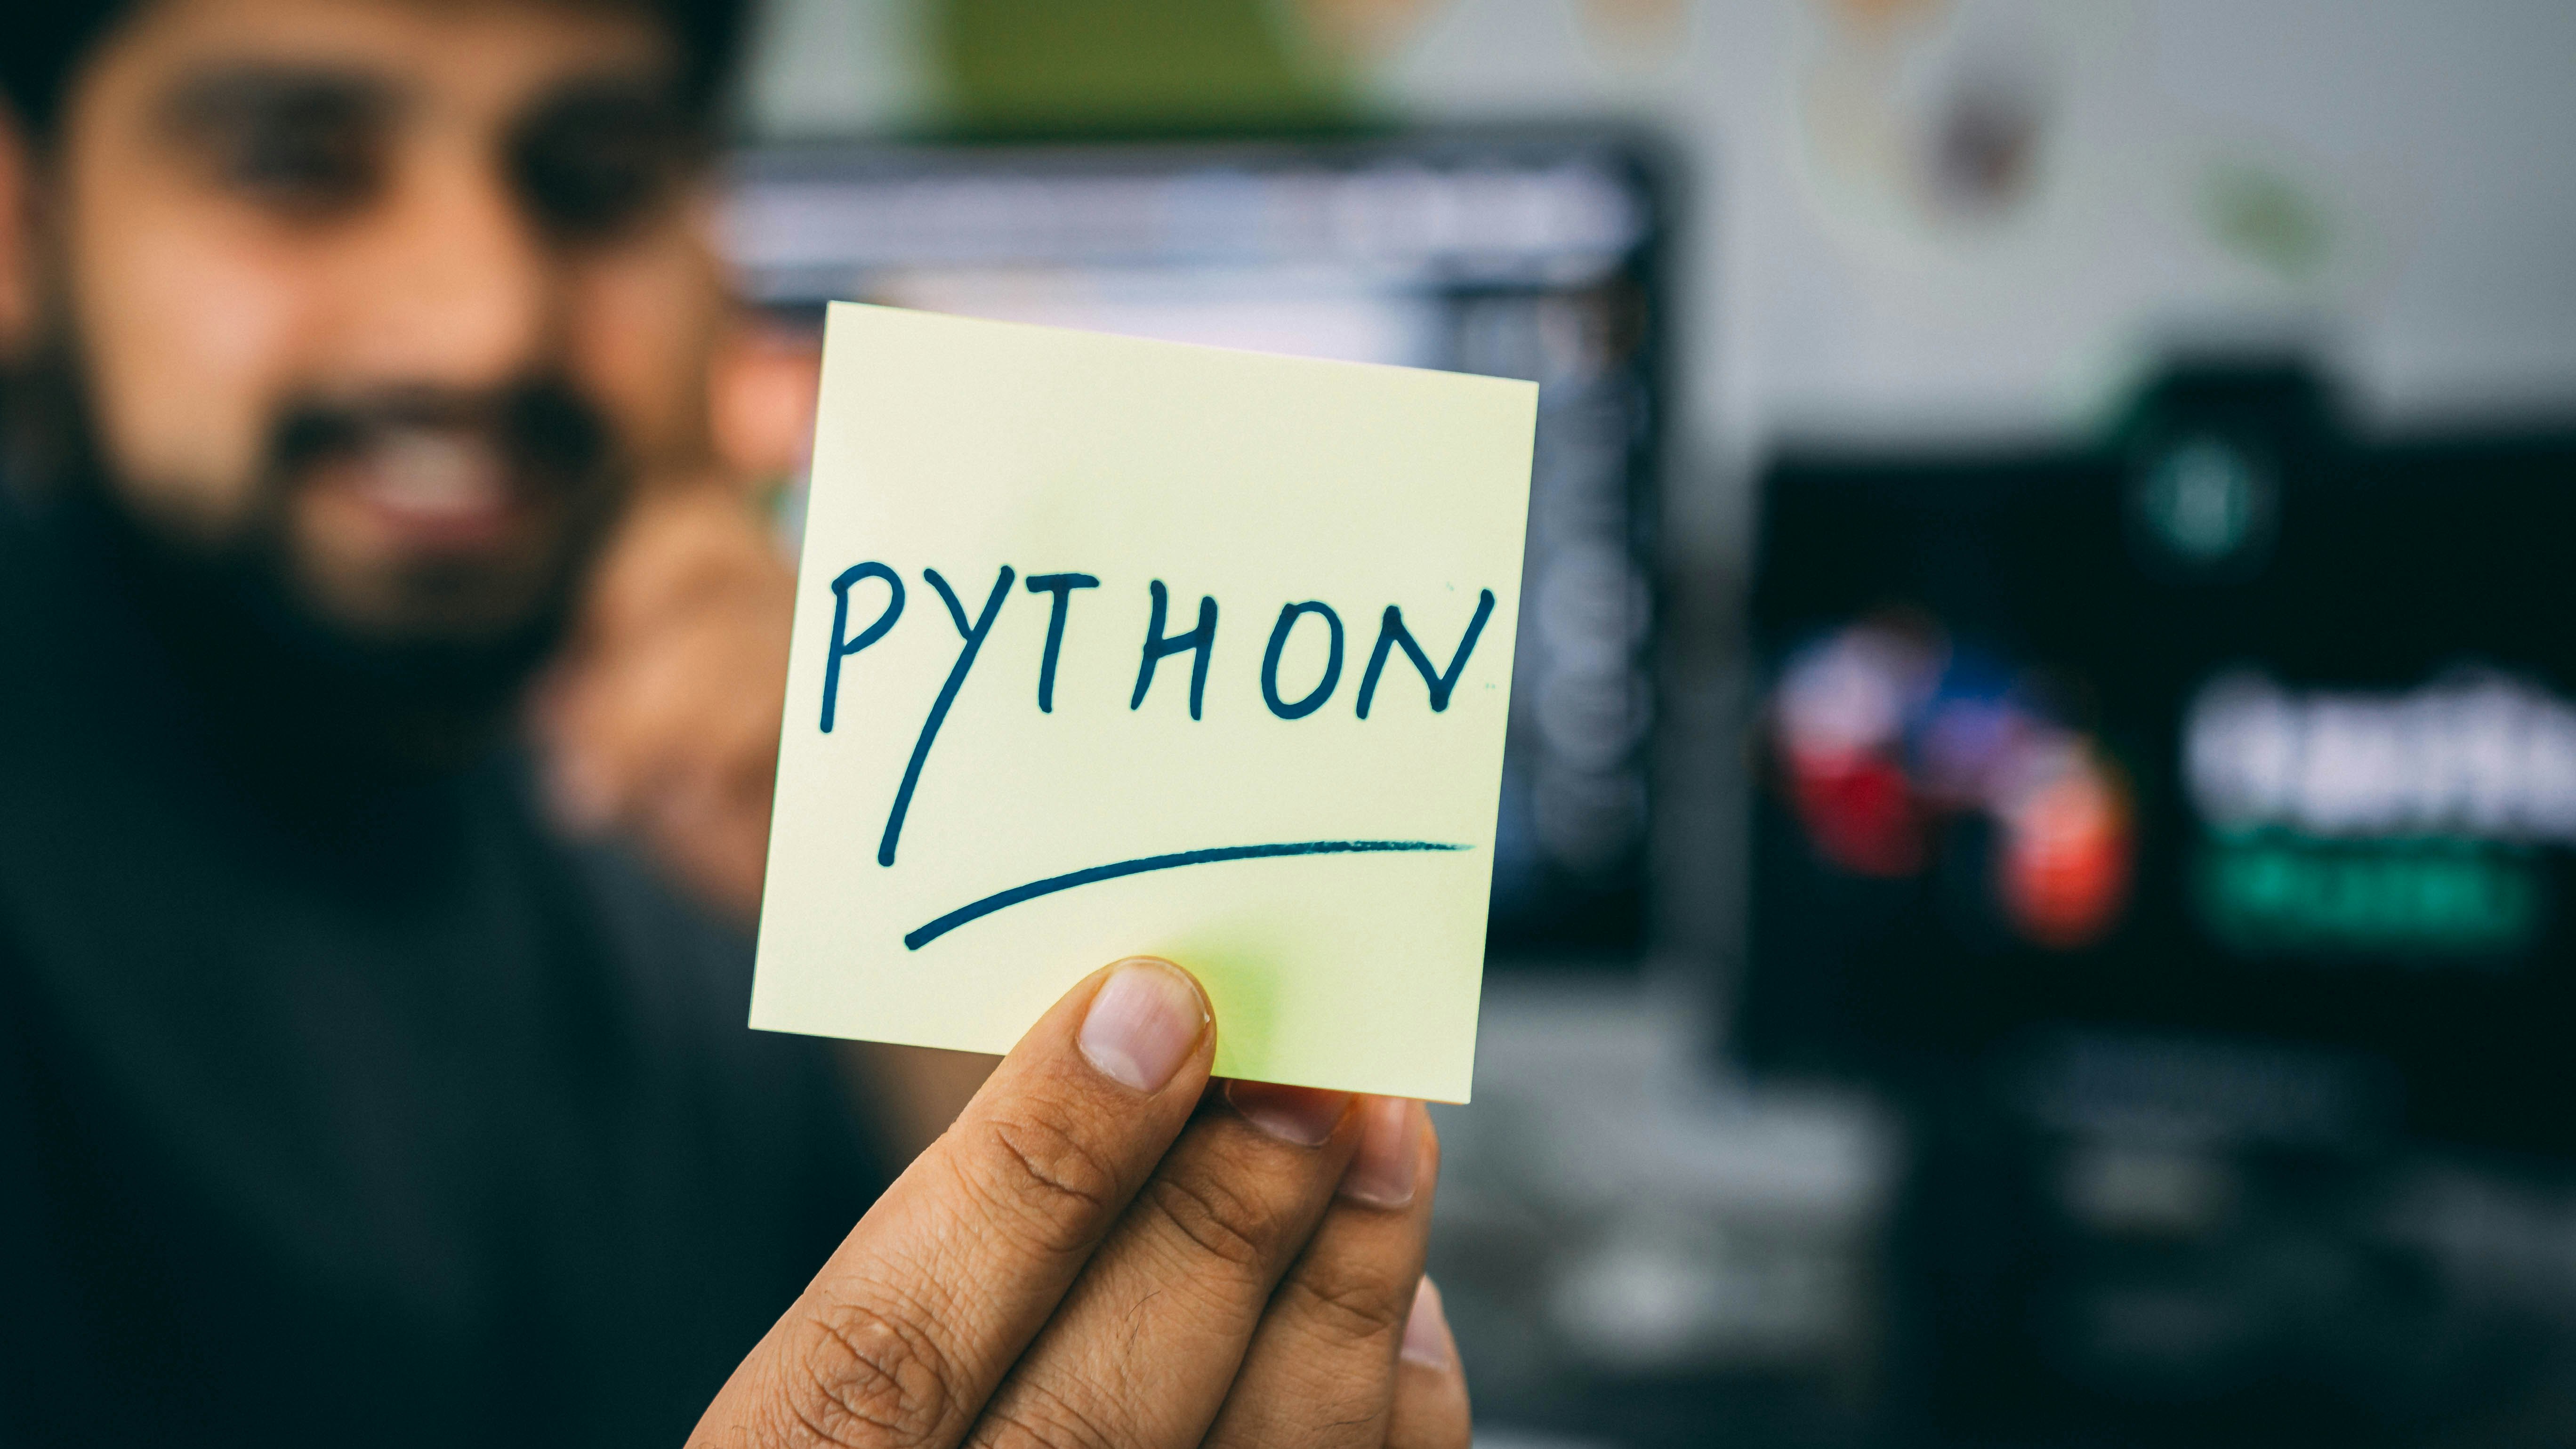 Python Programming: Adding Two Numbers Made Easy